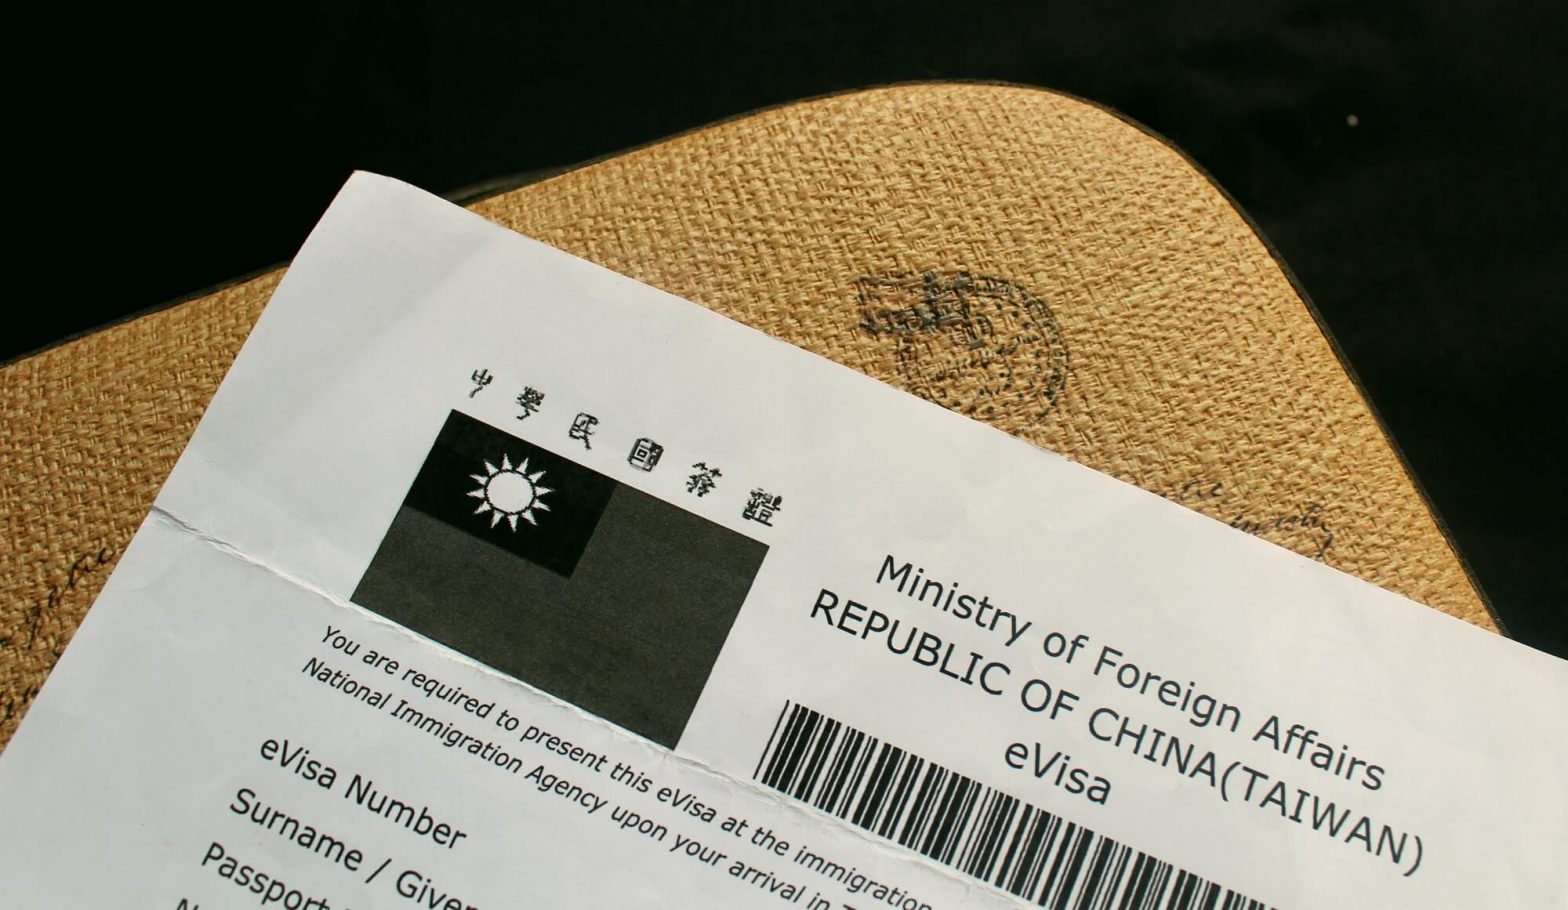 Getting visa to Taiwan made simpler for Filipinos